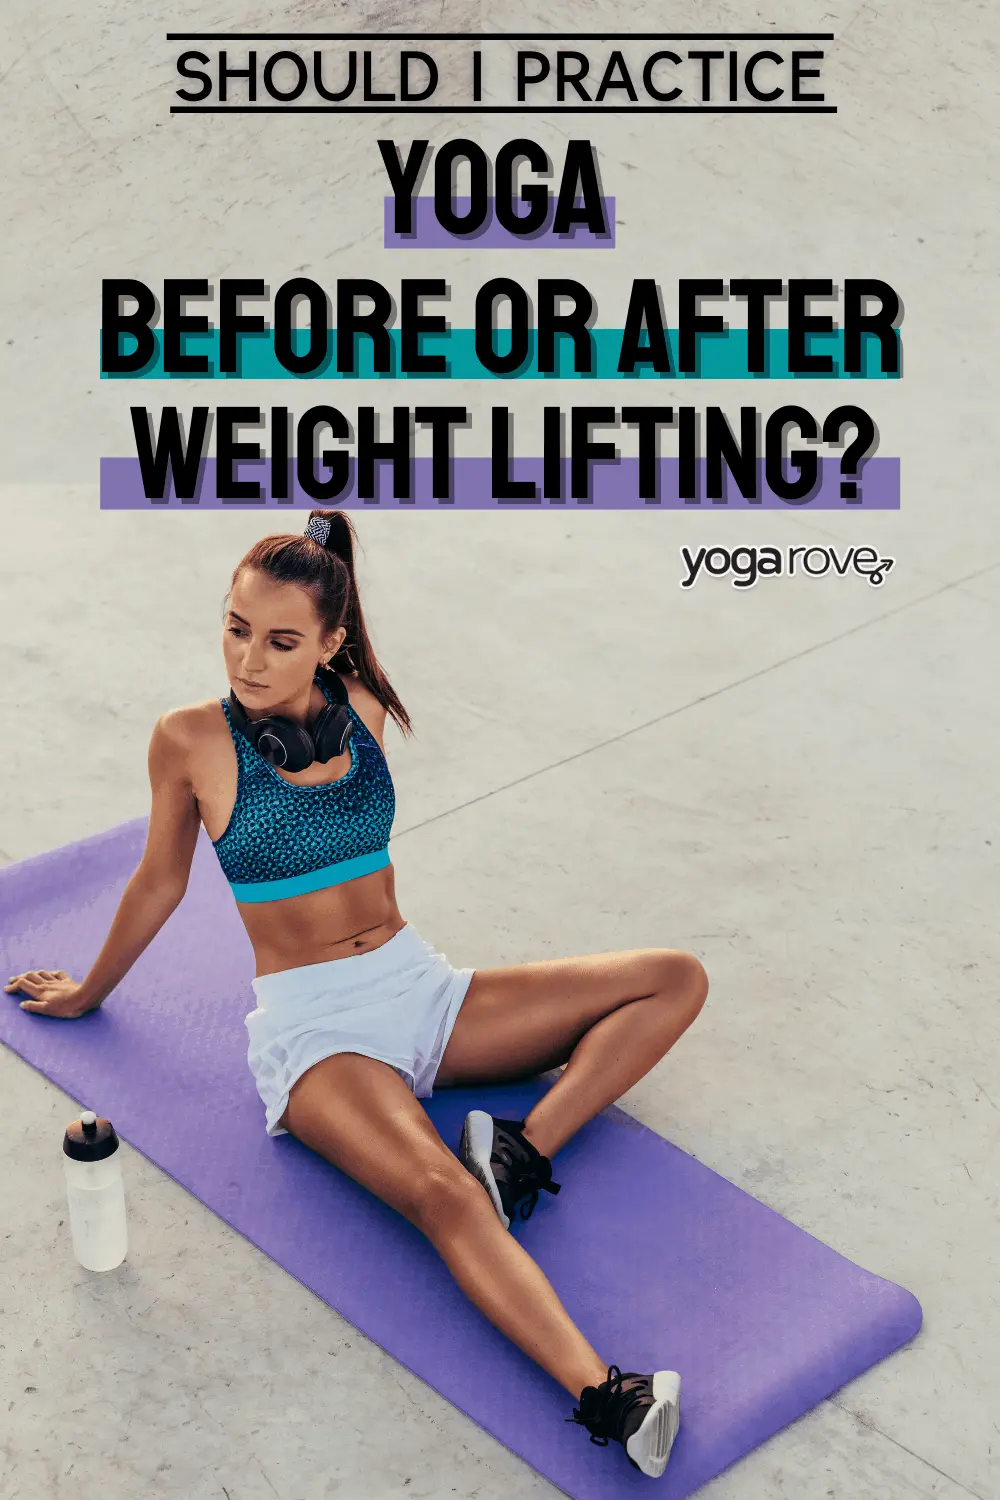 yoga before or after strength training - When should I fit my yoga into my workout schedule